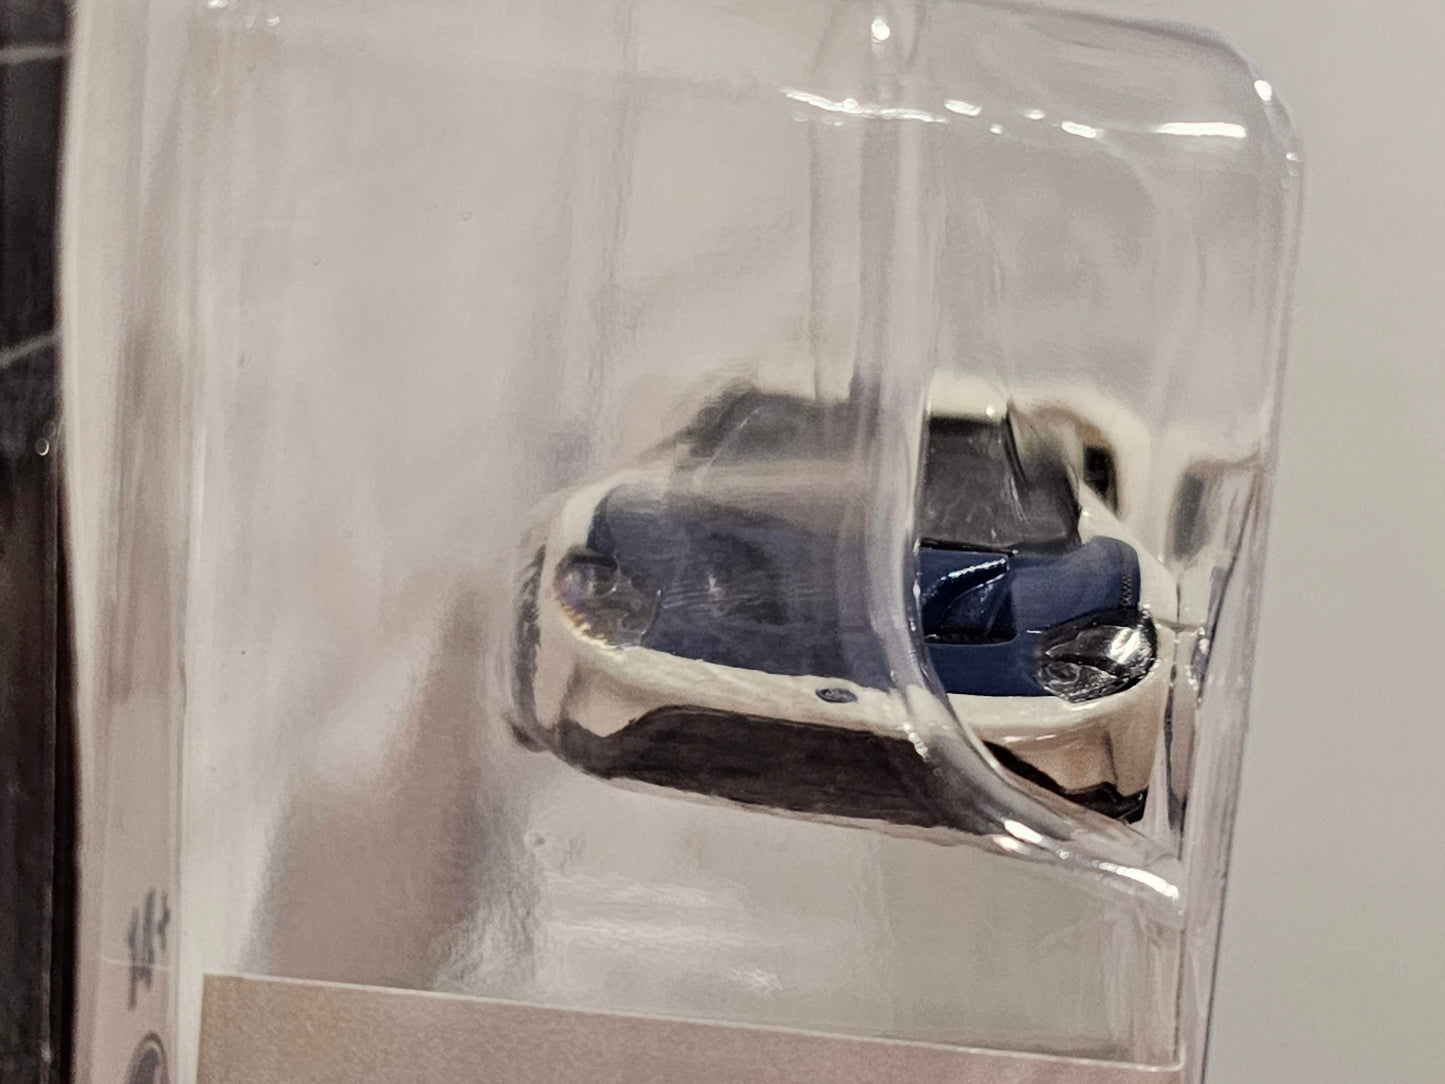 GreenLight Collectibles 2022 Ford GT Hobby Exclusive